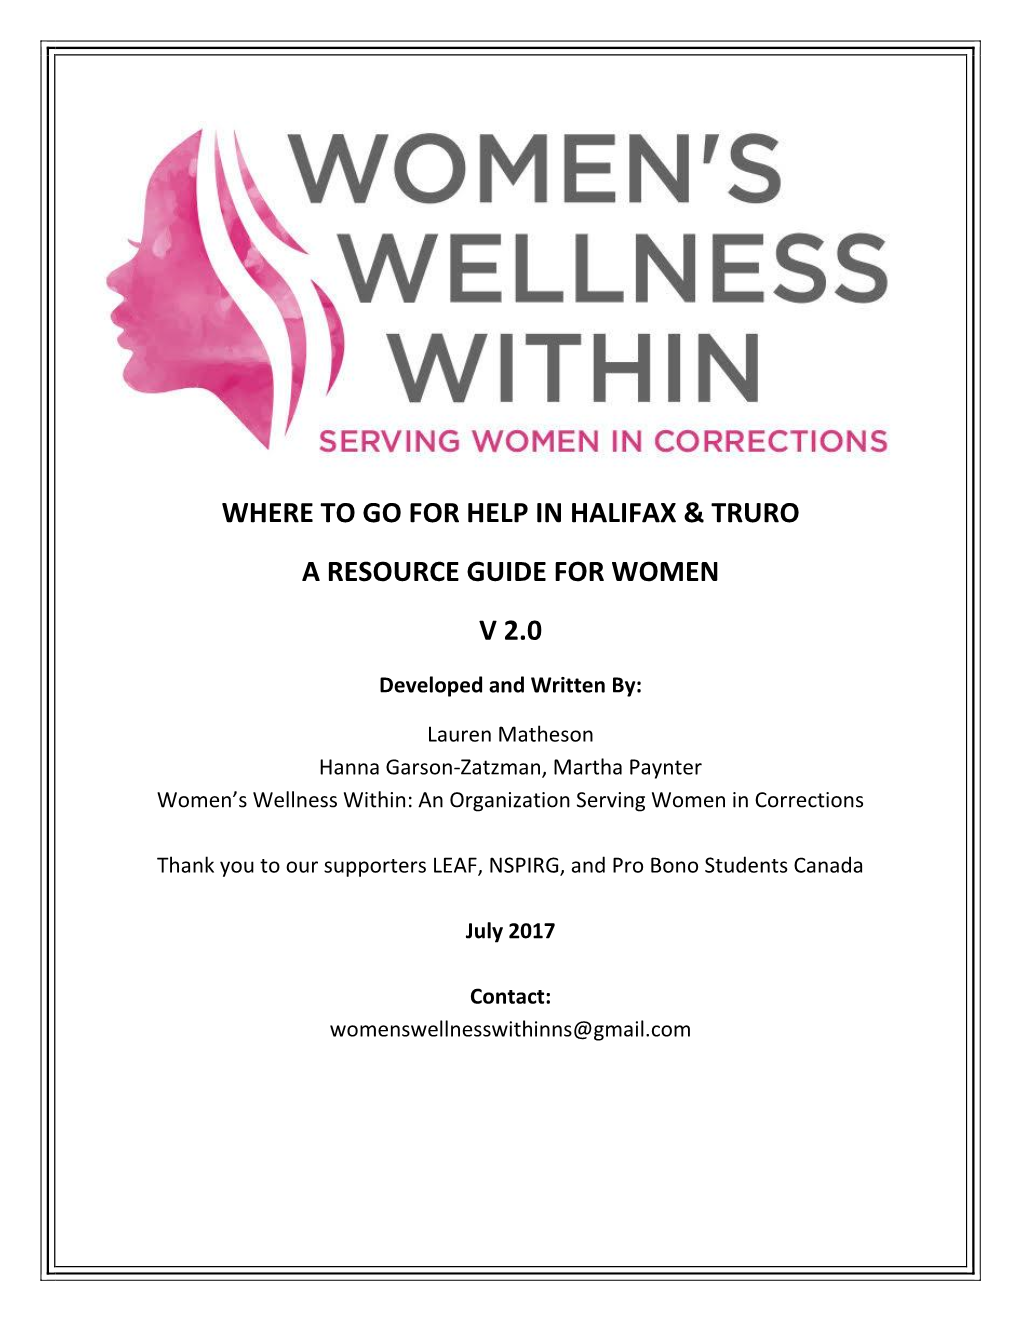 Where to Go for Help in Halifax and Truro: a Resource Guide for Women